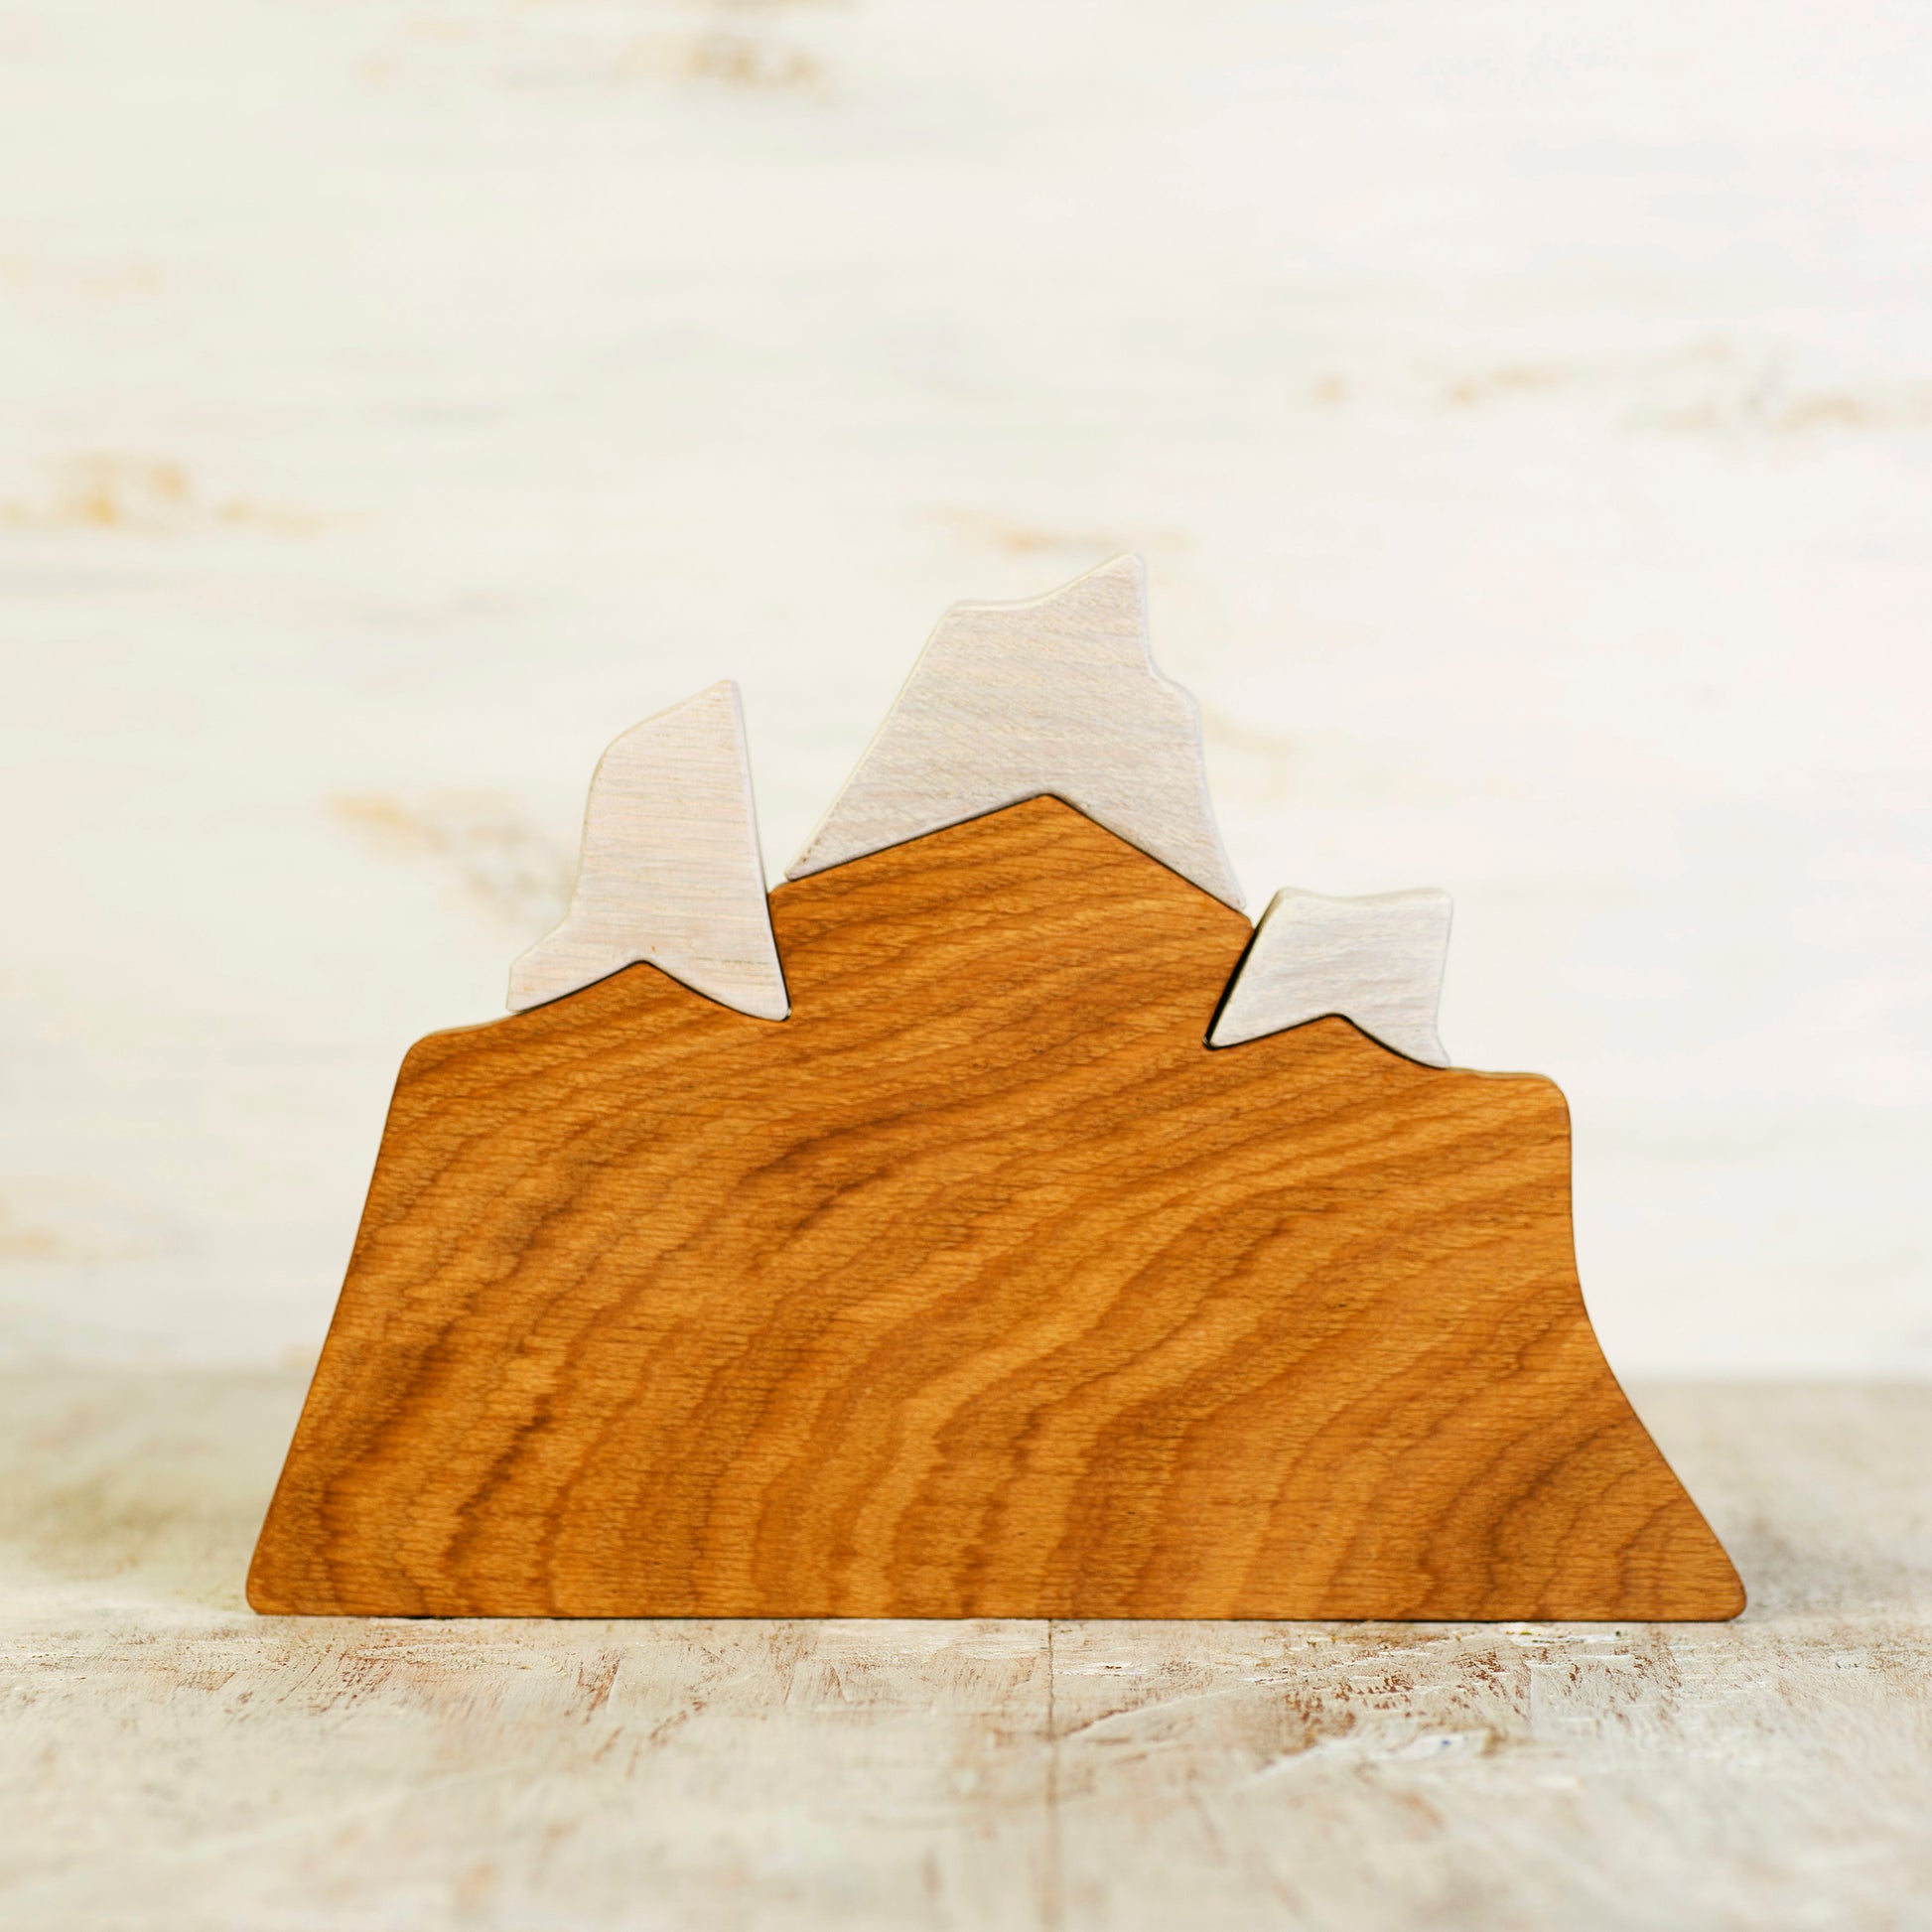 Wooden Mountain Puzzle - Things They Love